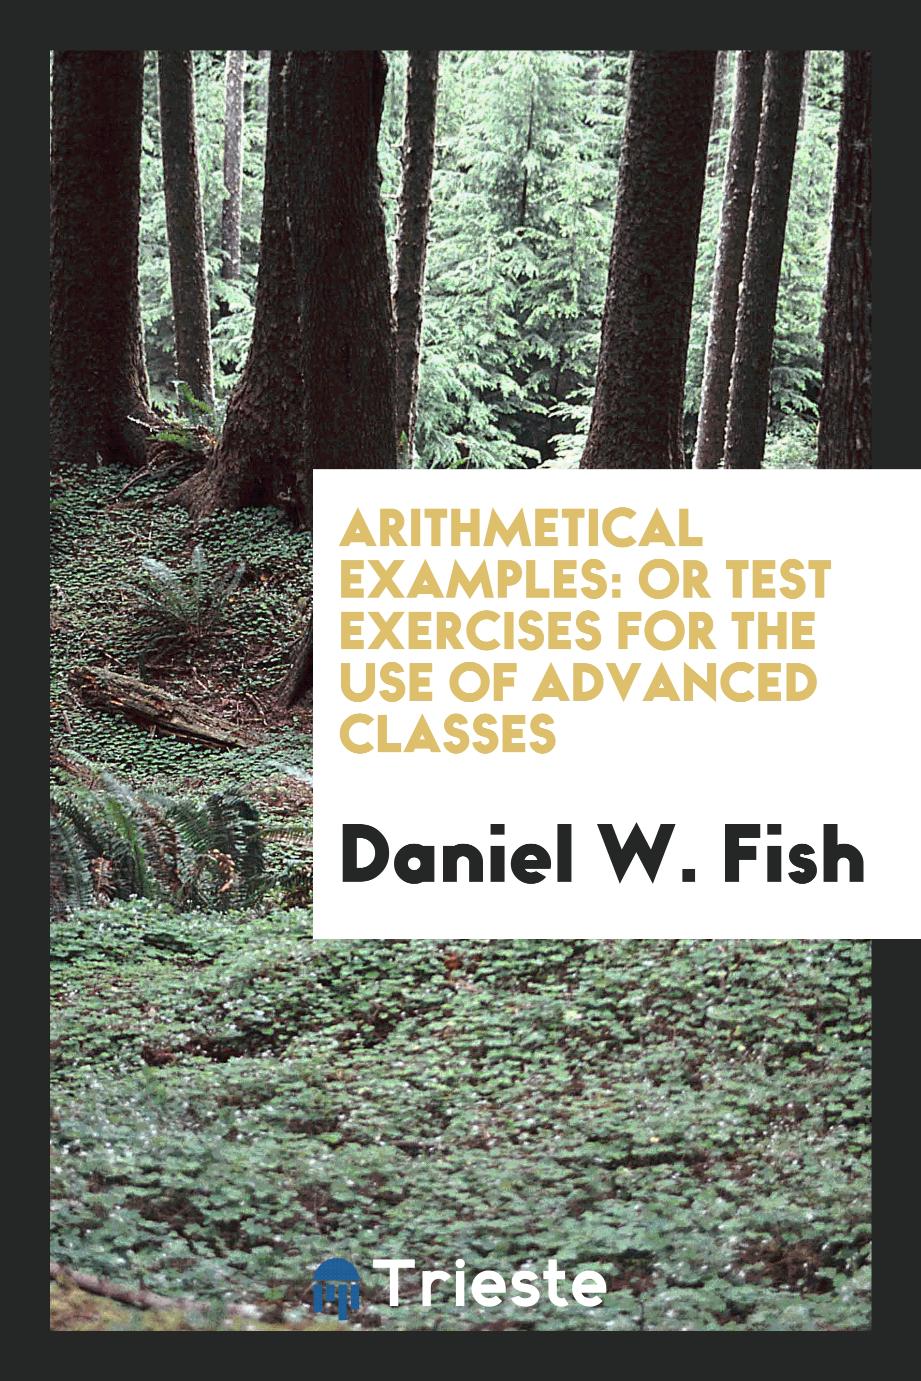 Arithmetical examples: or test exercises for the use of advanced classes